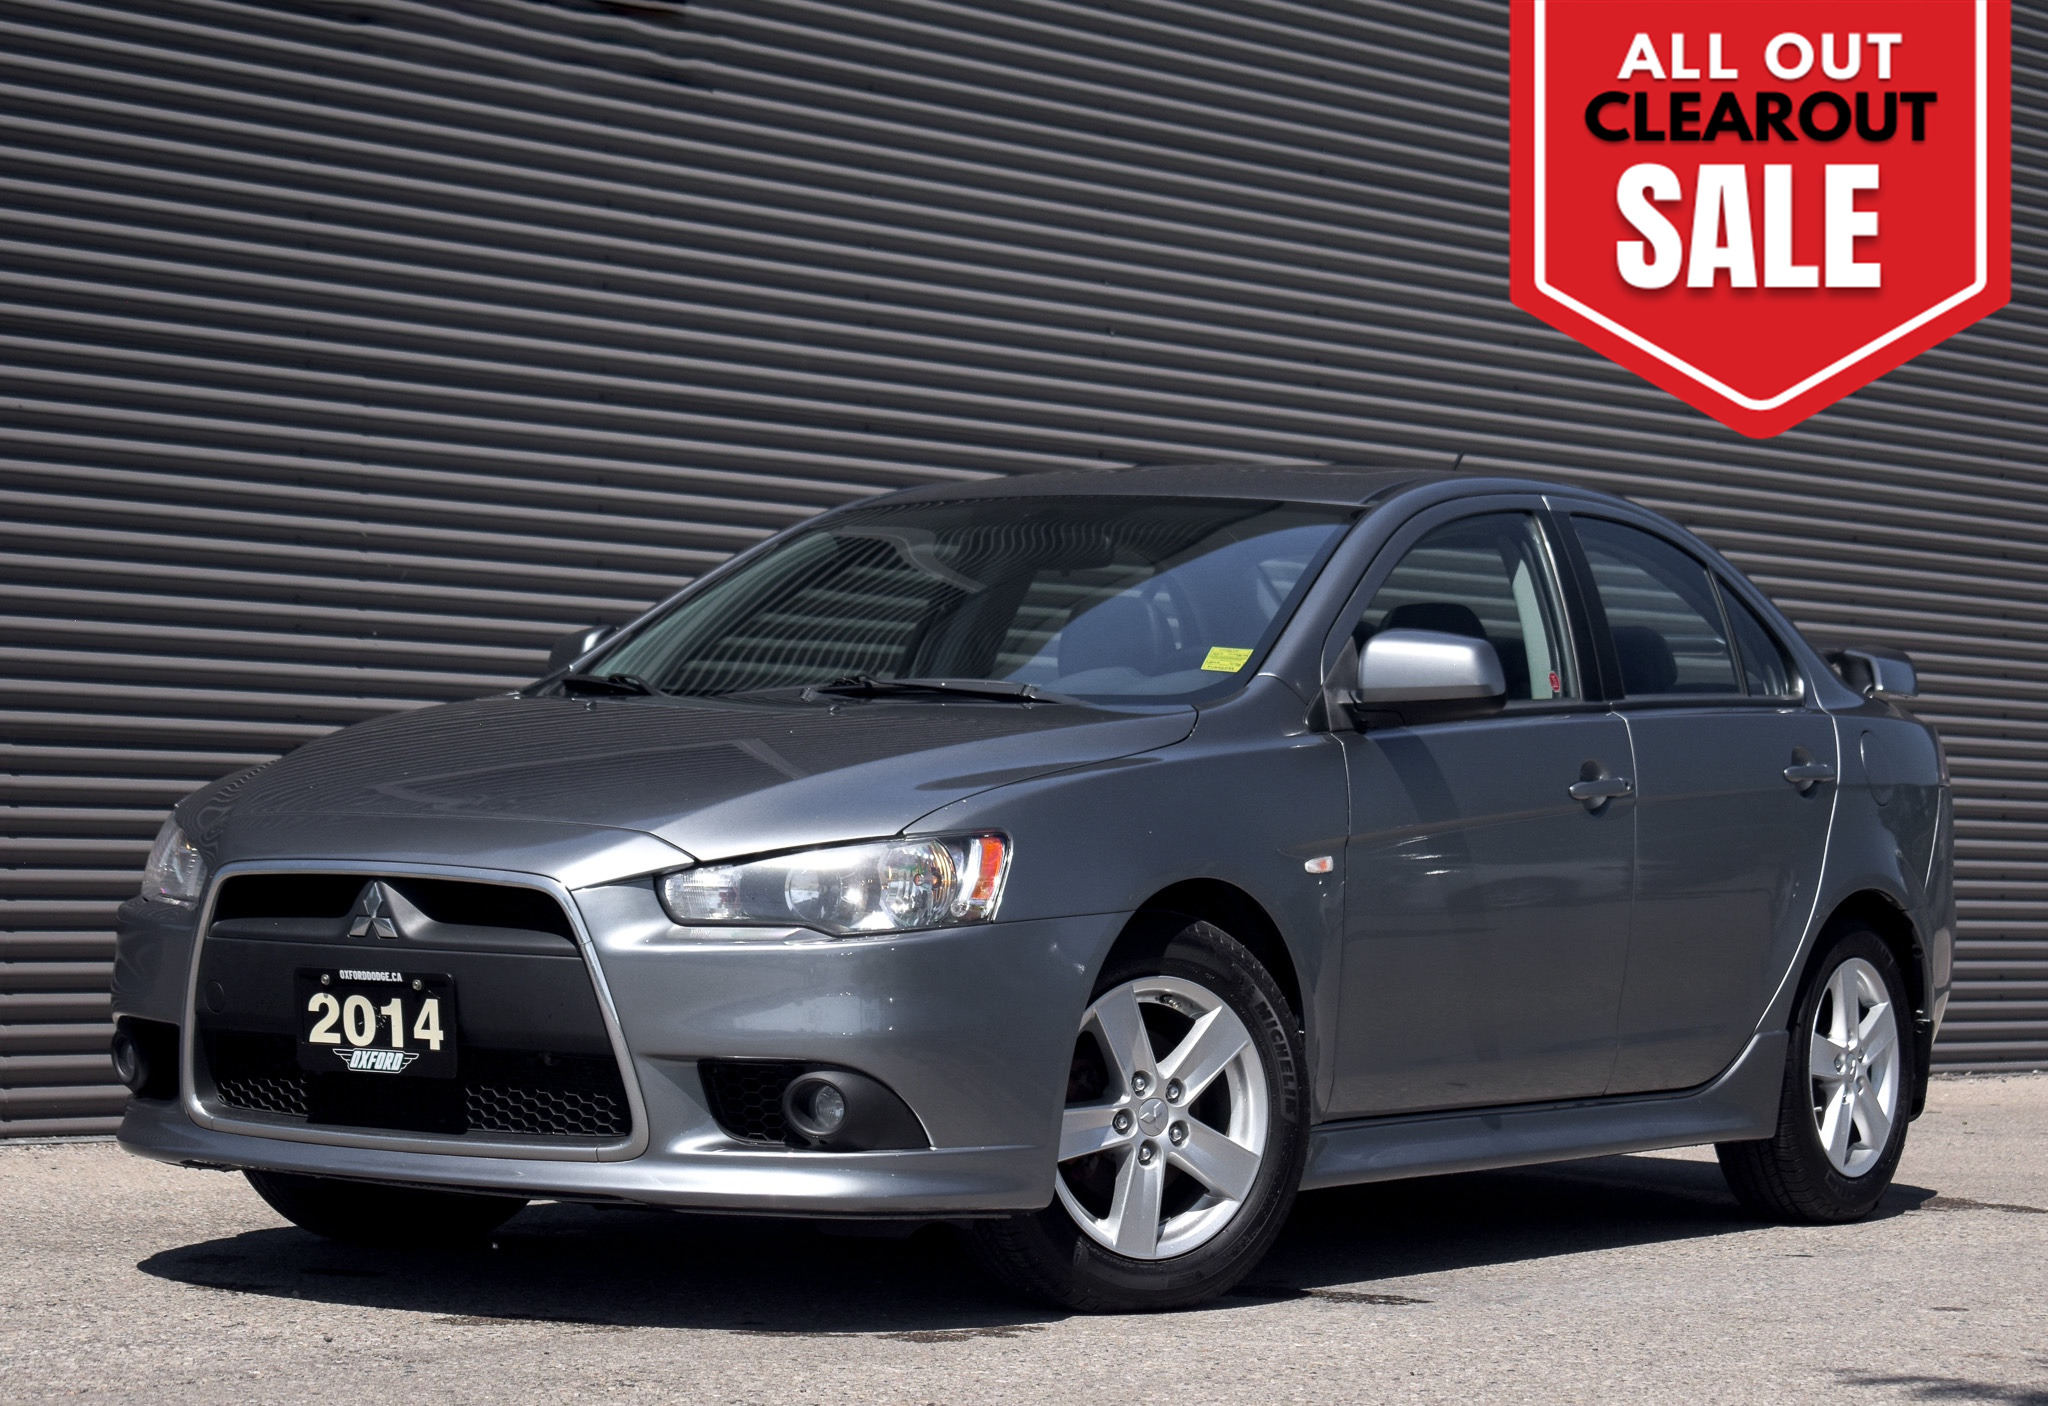 2014 Mitsubishi Lancer SE Leather, Two Sets Of Wheels And Tires, Sunroof,